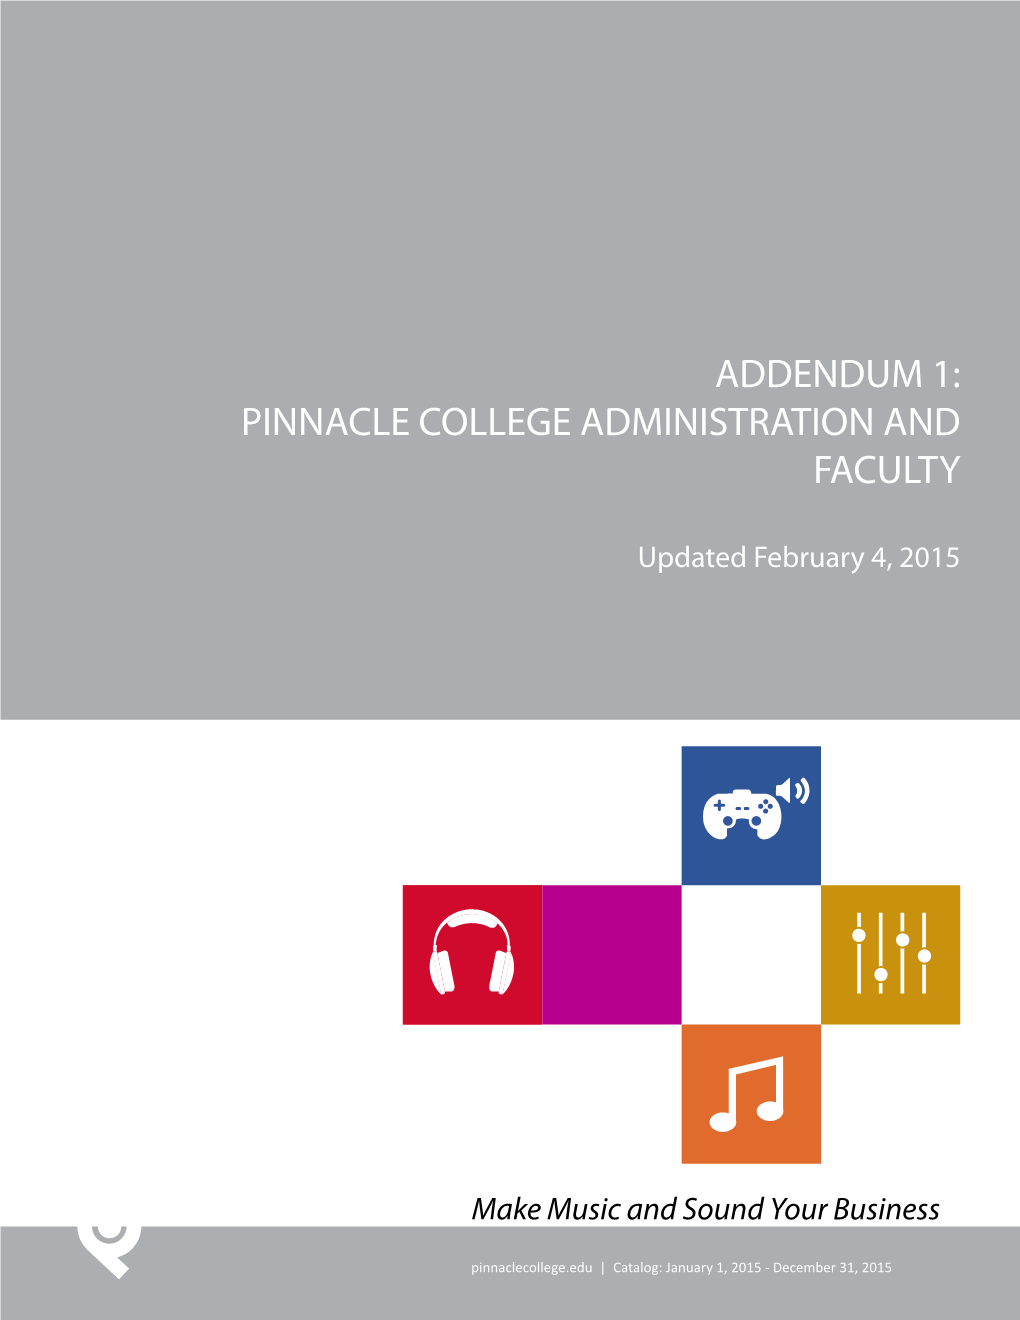 Addendum 1: Pinnacle College Administration and Faculty